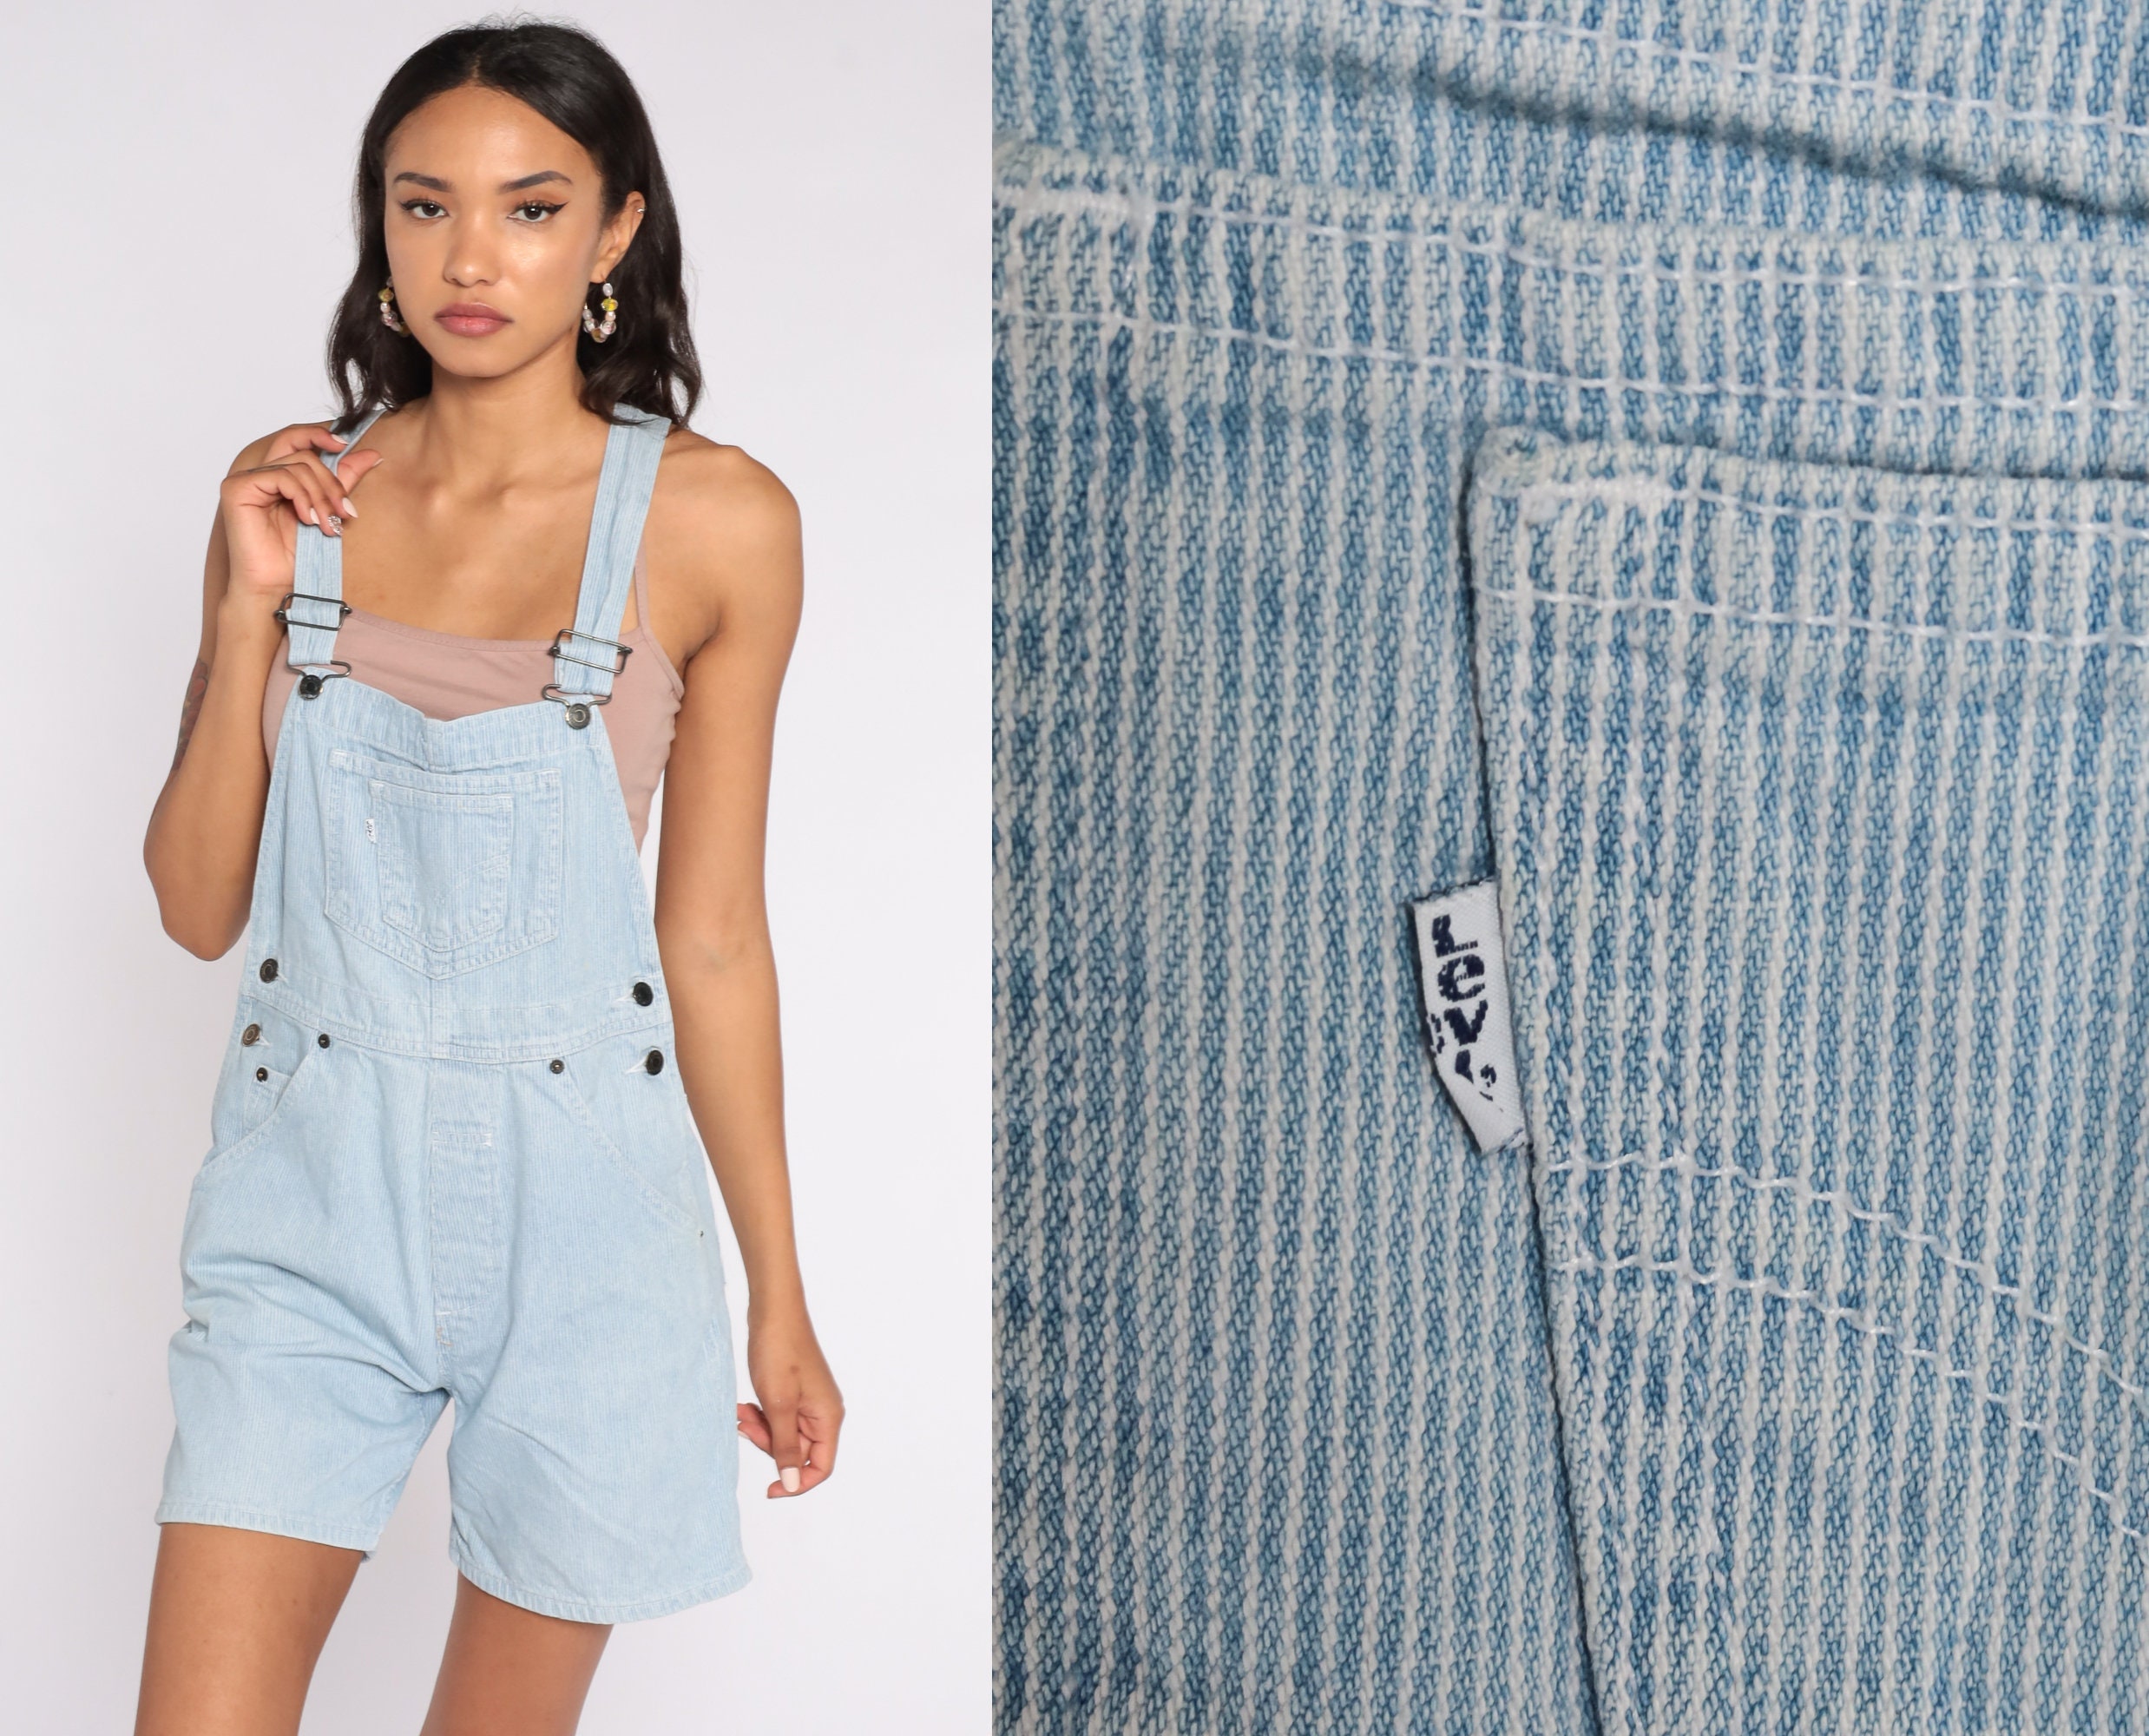 Vintage Levis Striped Overalls Denim Overall Shorts 80s Jean - Etsy